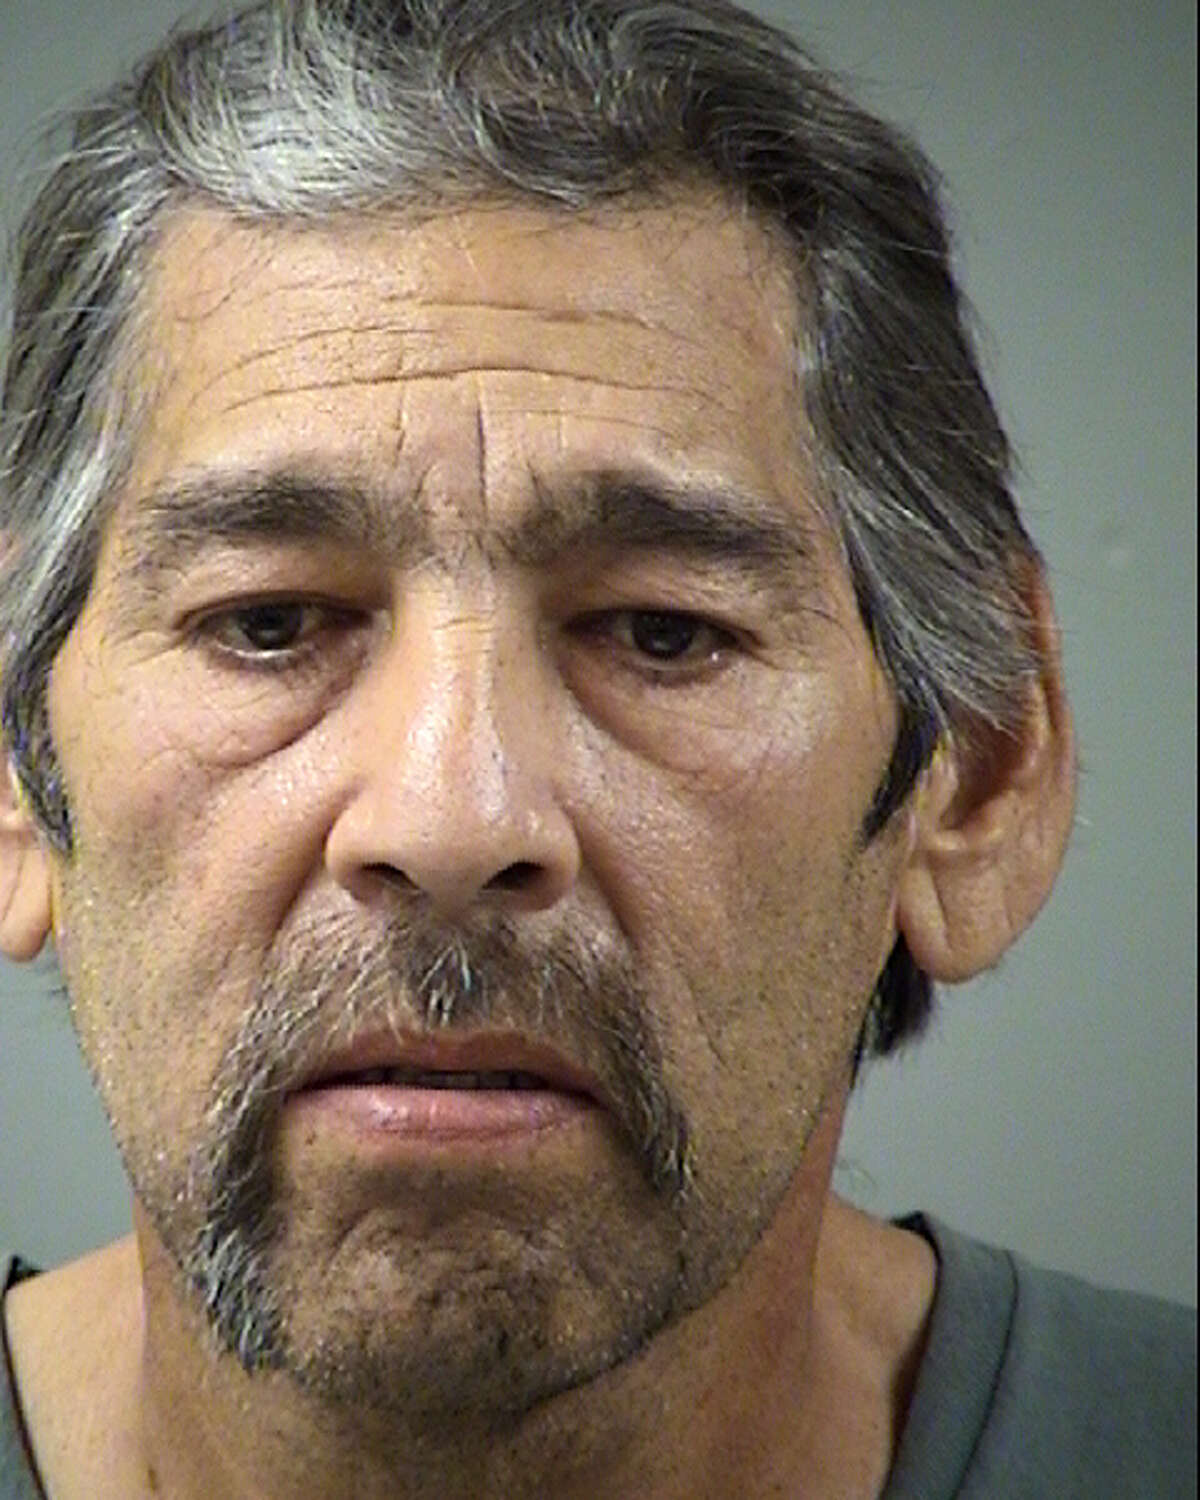 Antonio Nunez, 59, is accused of stabbing his girlfriend in the butt with a pitchfork.